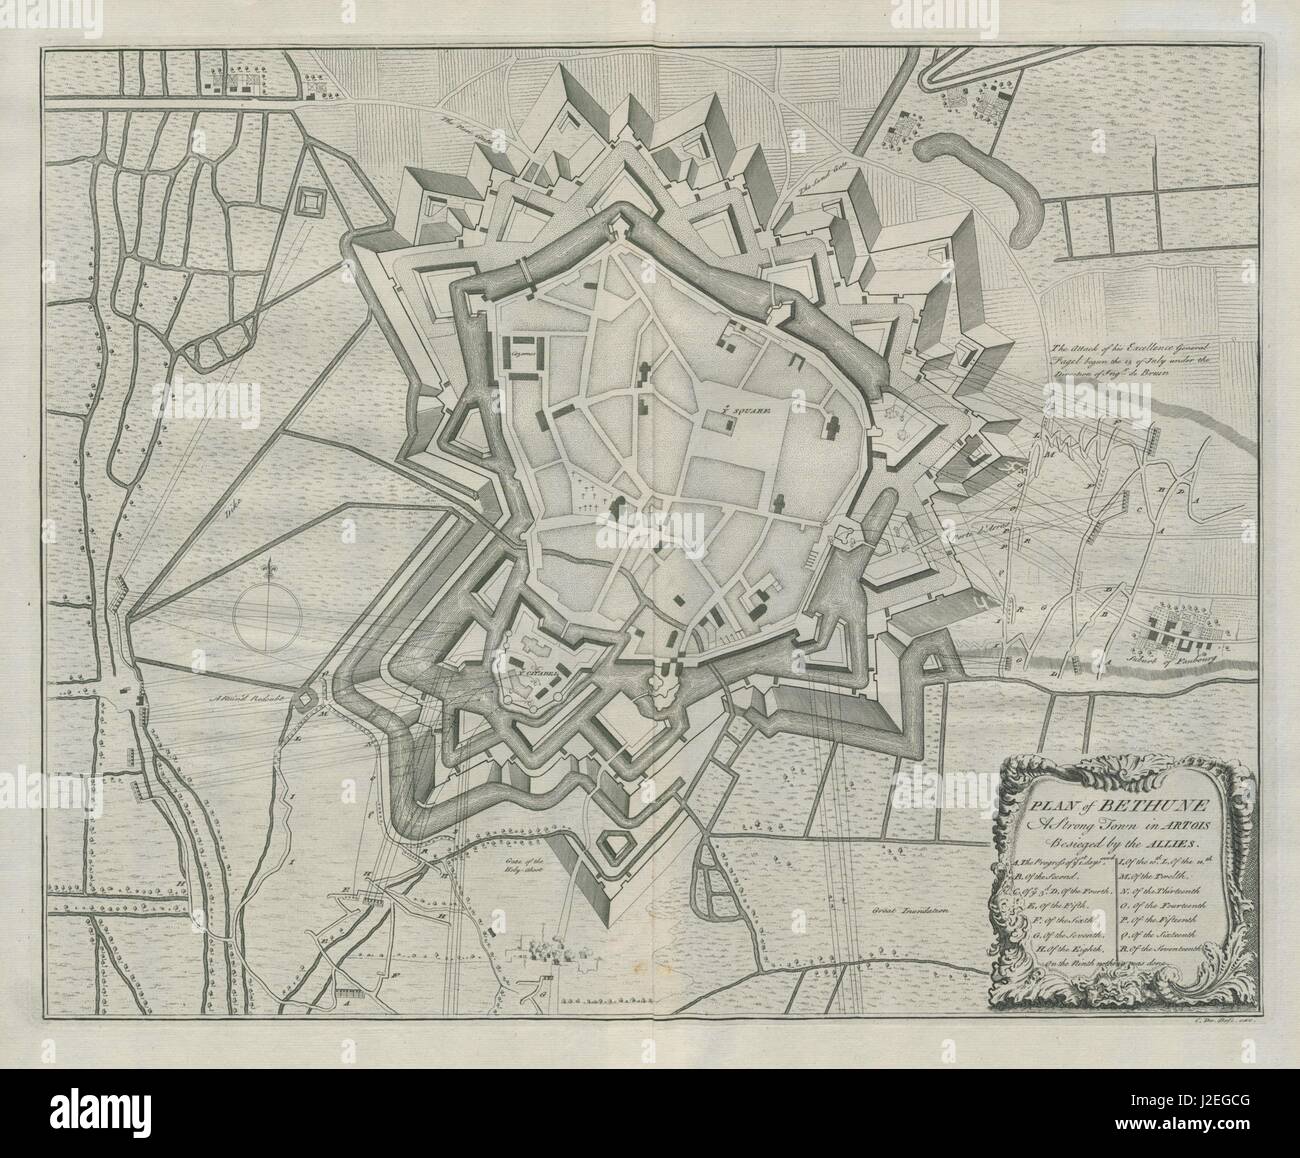 'Plan of Bethune, a strong town in Artois…' by Claude DU BOSC. Béthune c1735 map Stock Photo